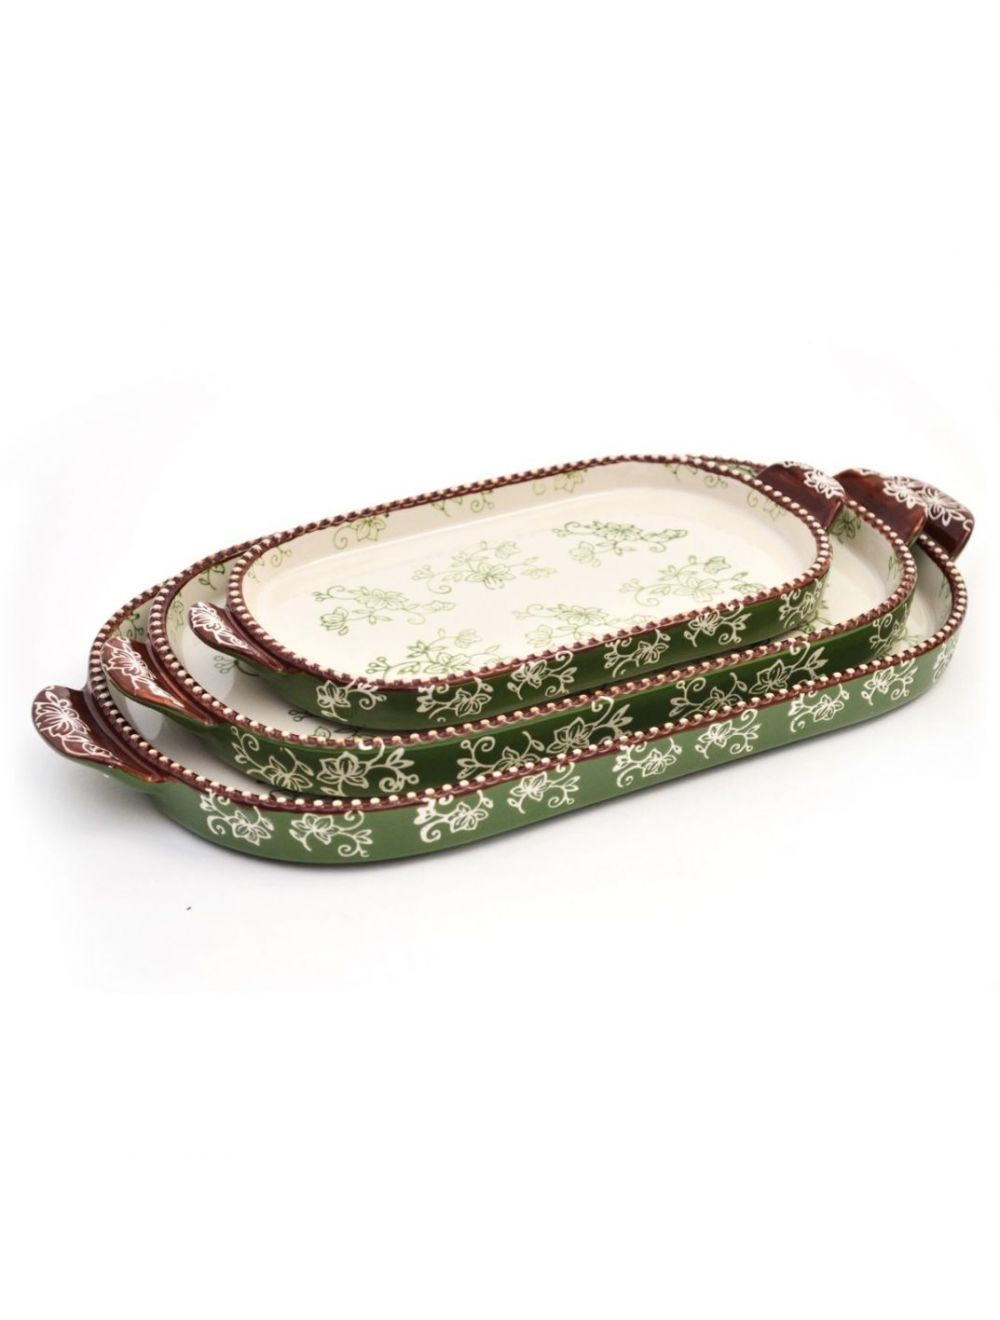 Temp-tations Floral Lace Squoval Tray Set - 3 Piece -T48987-Green